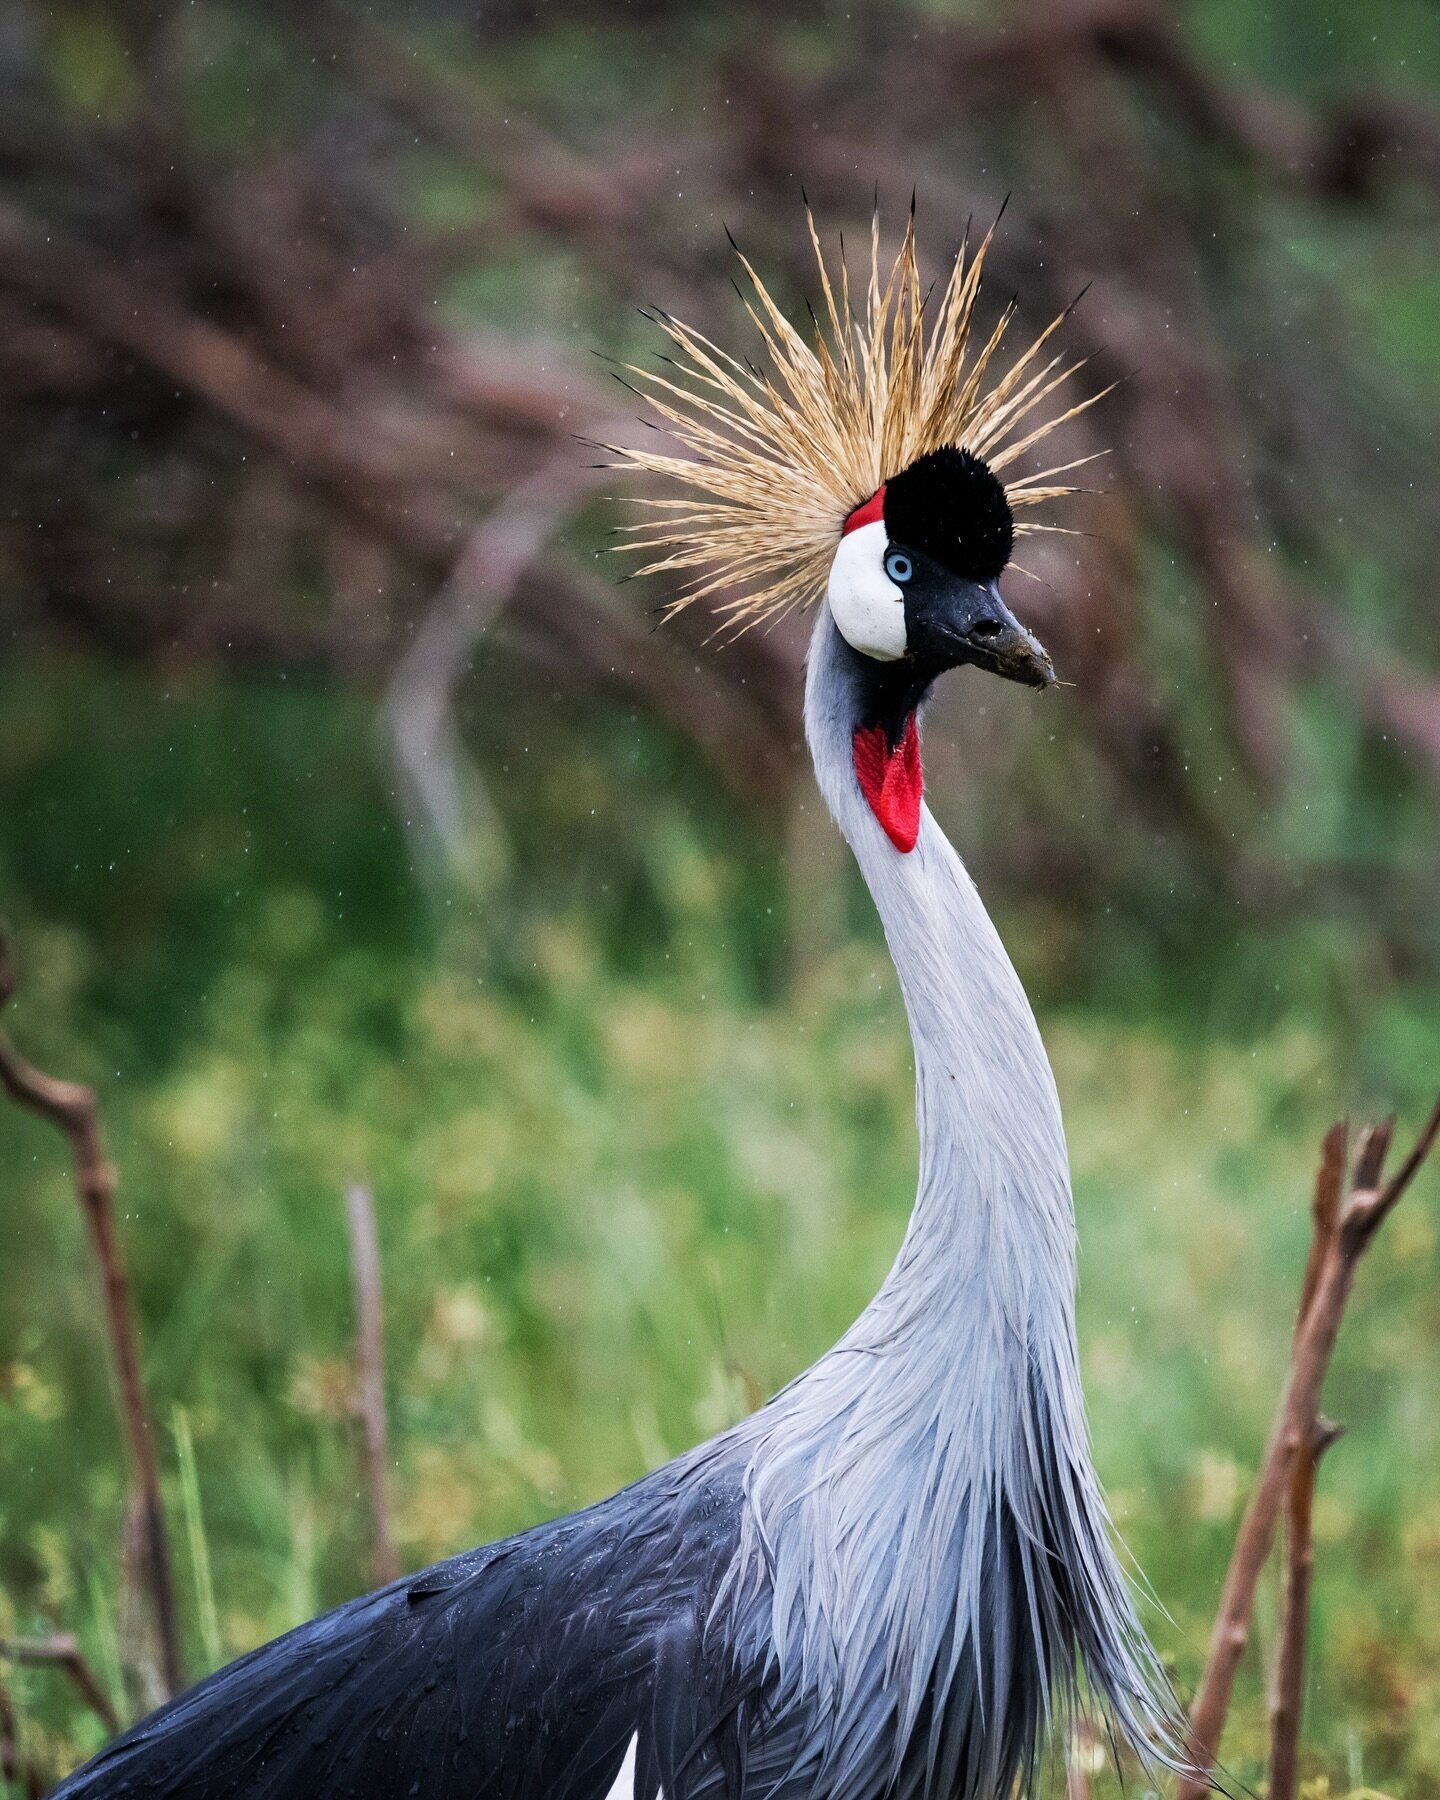 My favorite thing to photograph on safari! These cranes are so gorgeous. 
🗺 &ldquo;Once the travel bug bites there is no known antidote, and I know that I shall be happily infected until the end of my life.&rdquo; &ndash; Michael Palin ⛺🌉

We have 